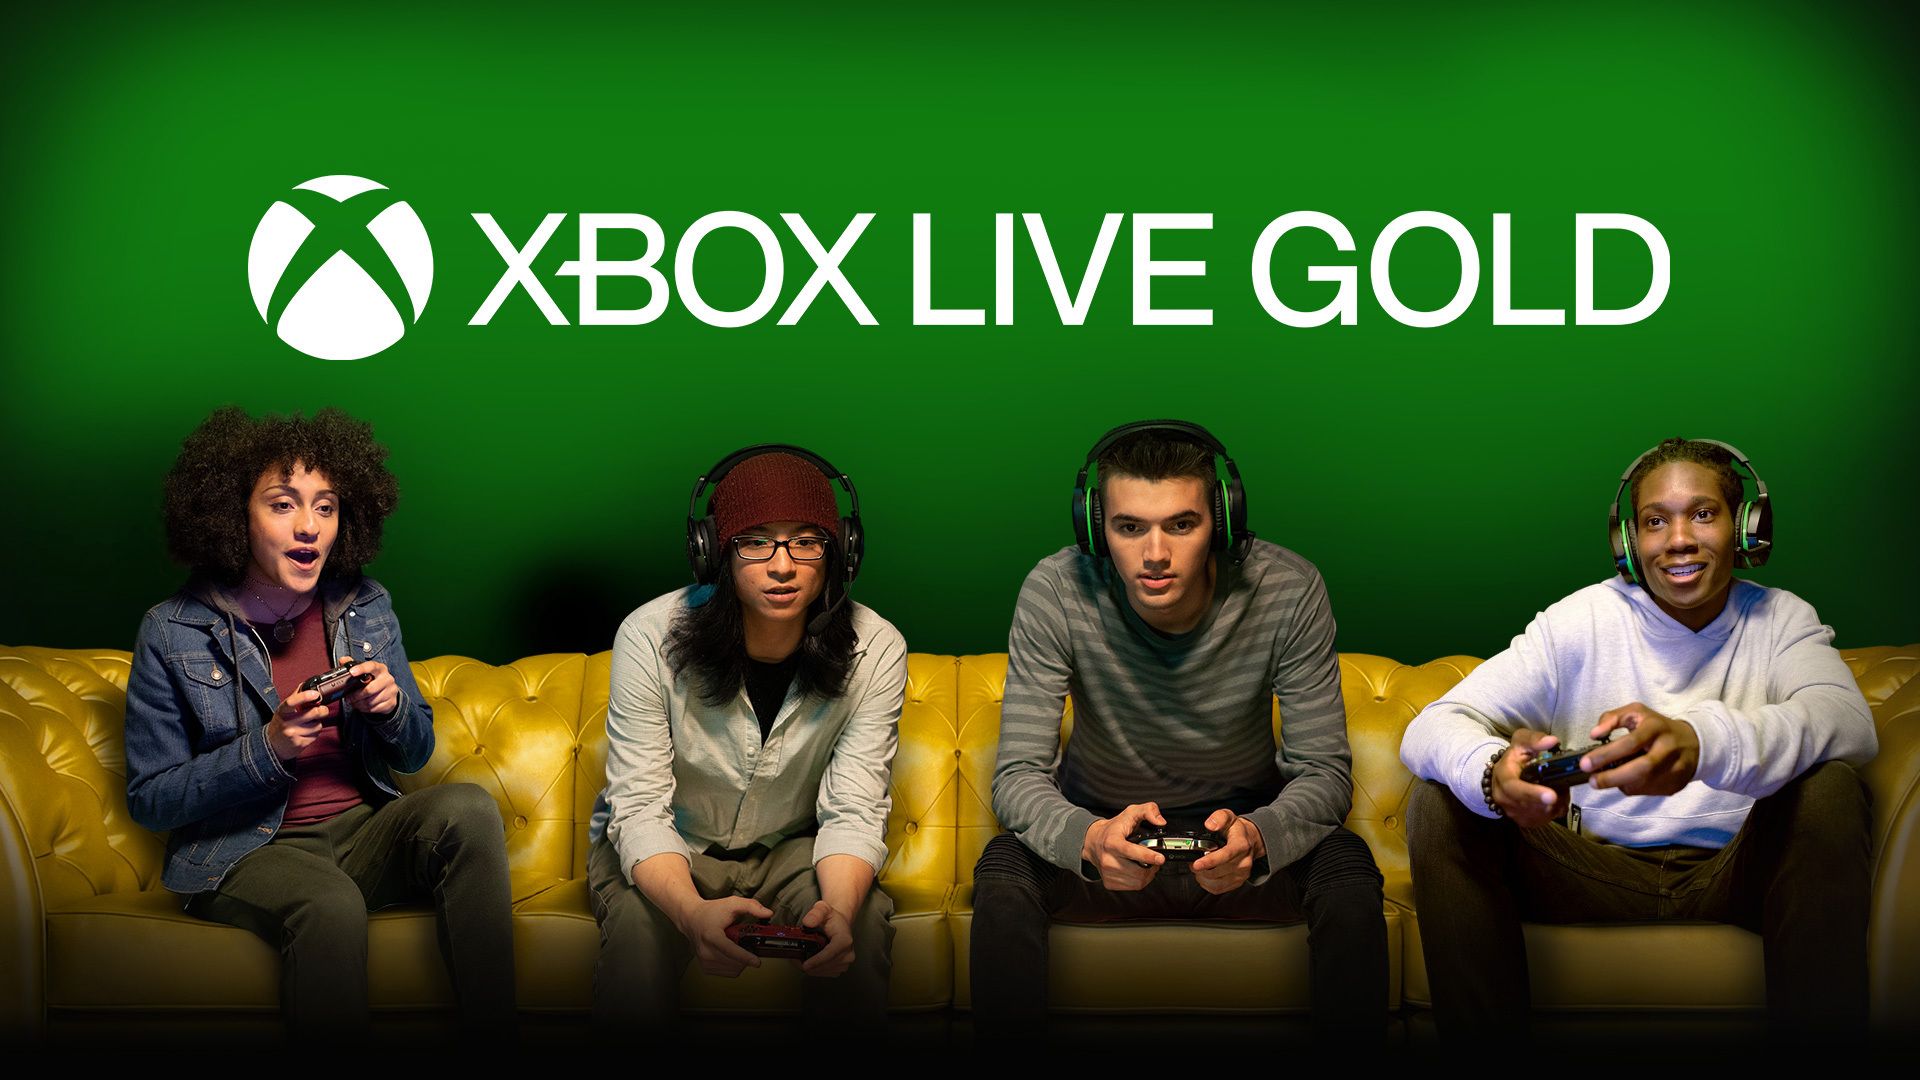 LG Global - Get the most out of your XBOX with Game Pass Ultimate. Enjoy  all the benefits of Xbox Live Gold, over 100 high-quality games for console  and PC, and an